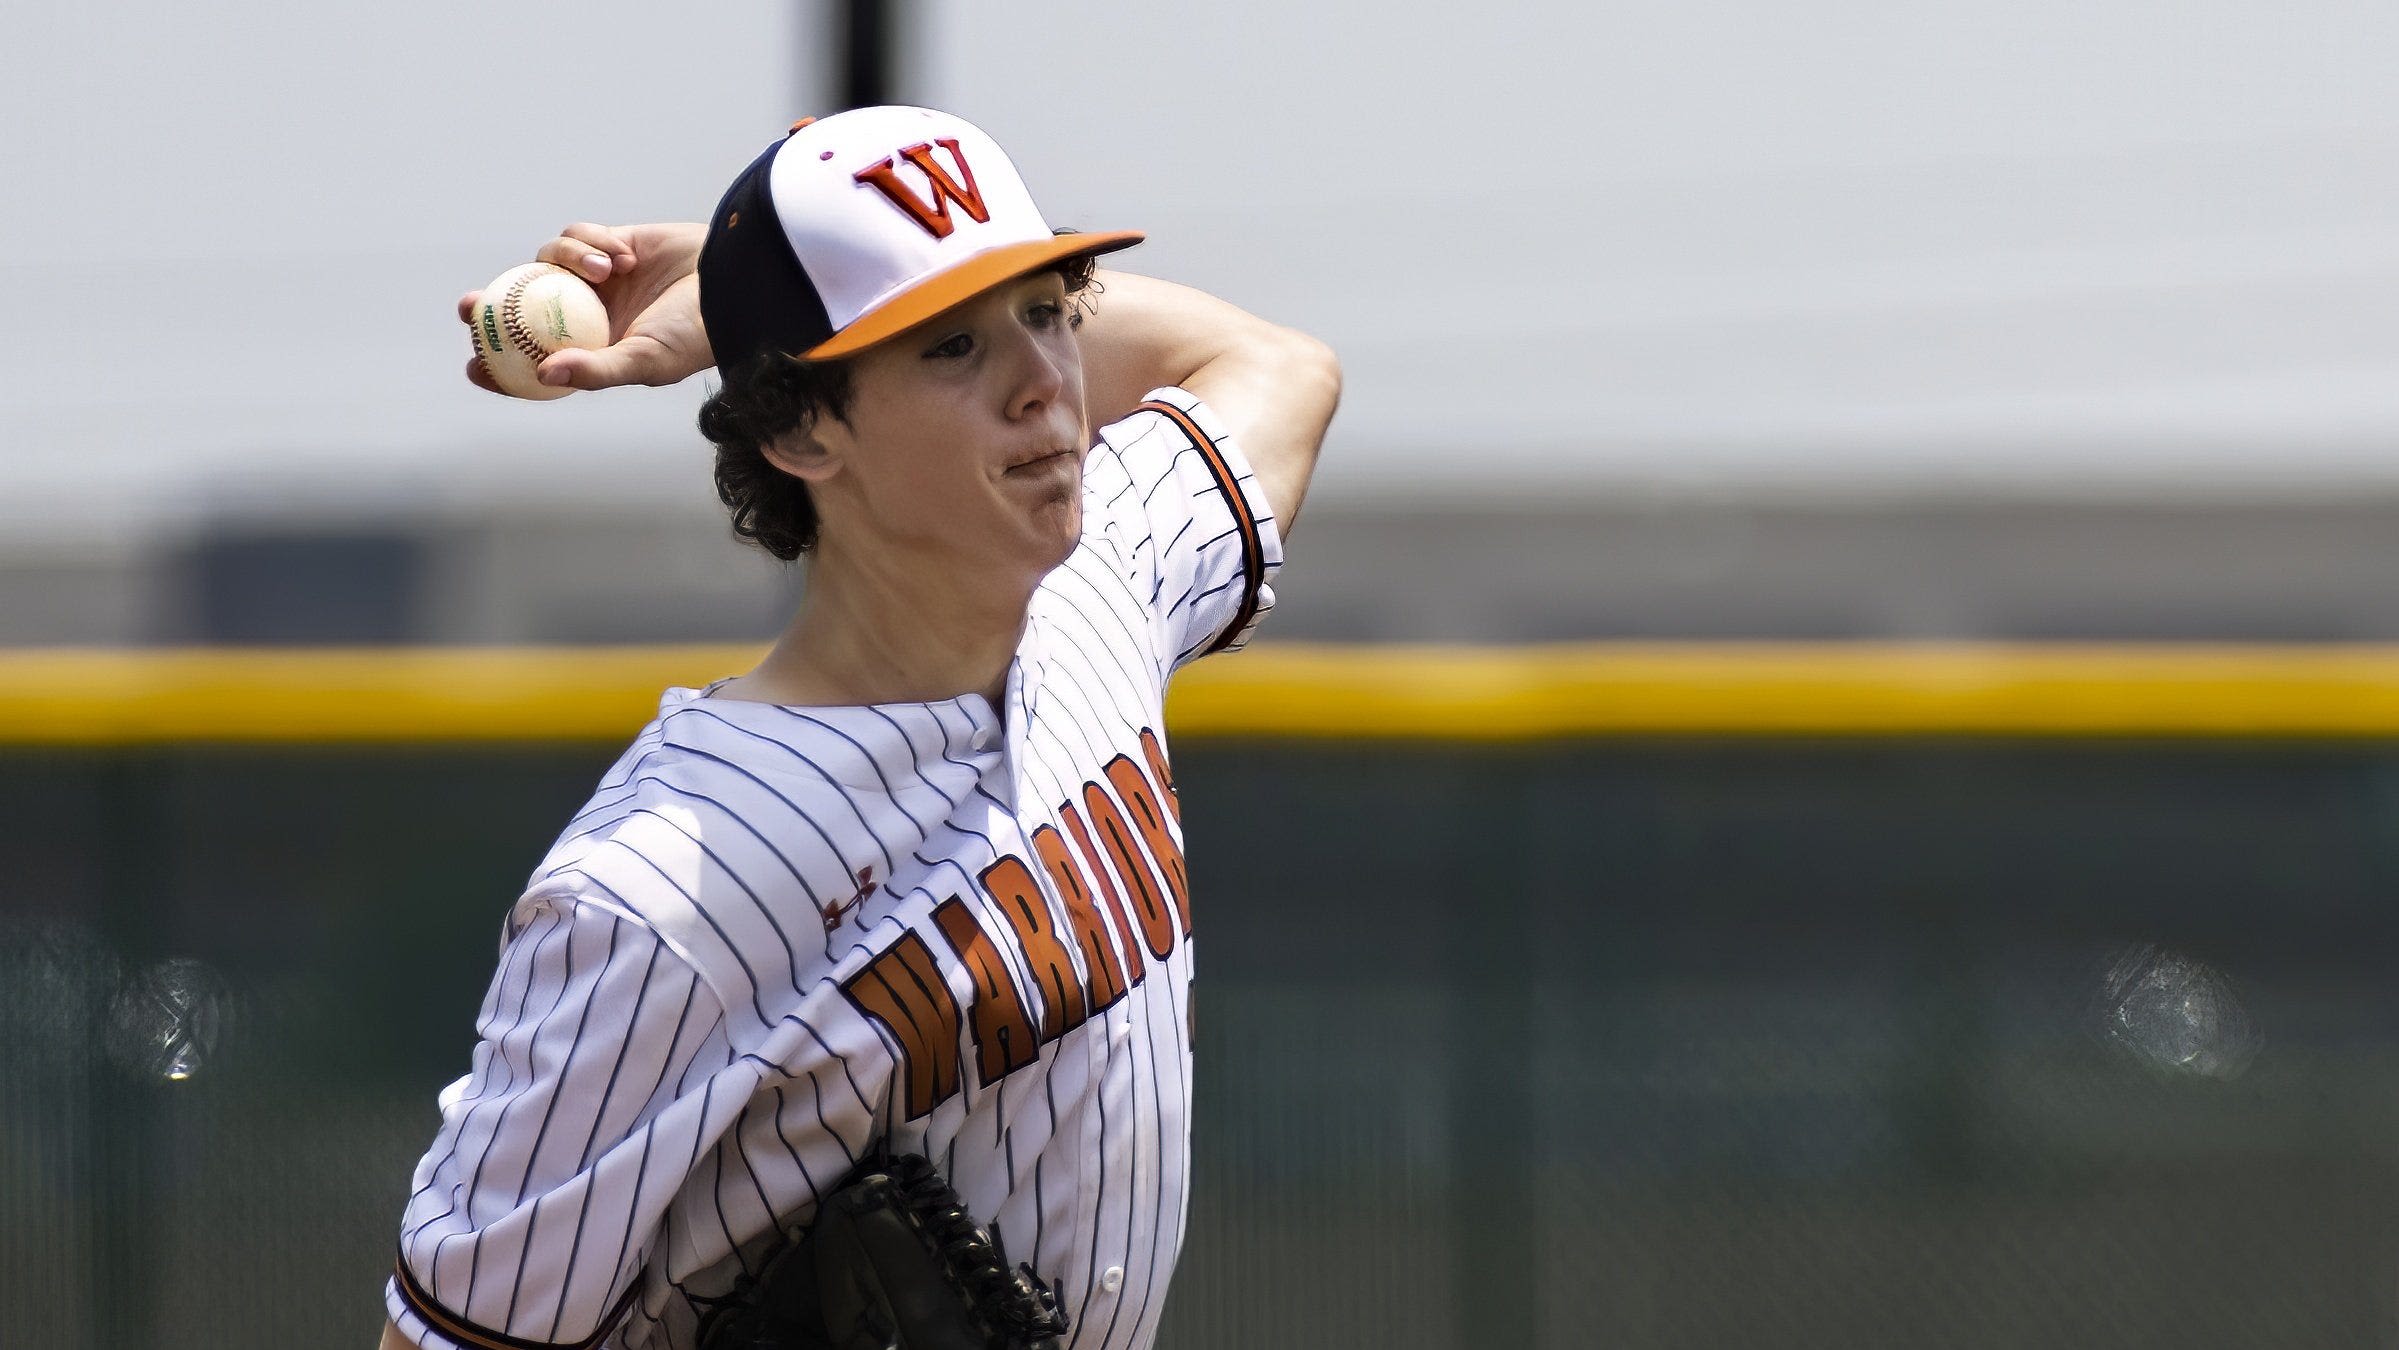 UIL baseball playoffs: Austin-area teams take key wins in bidistrict playoff series openers